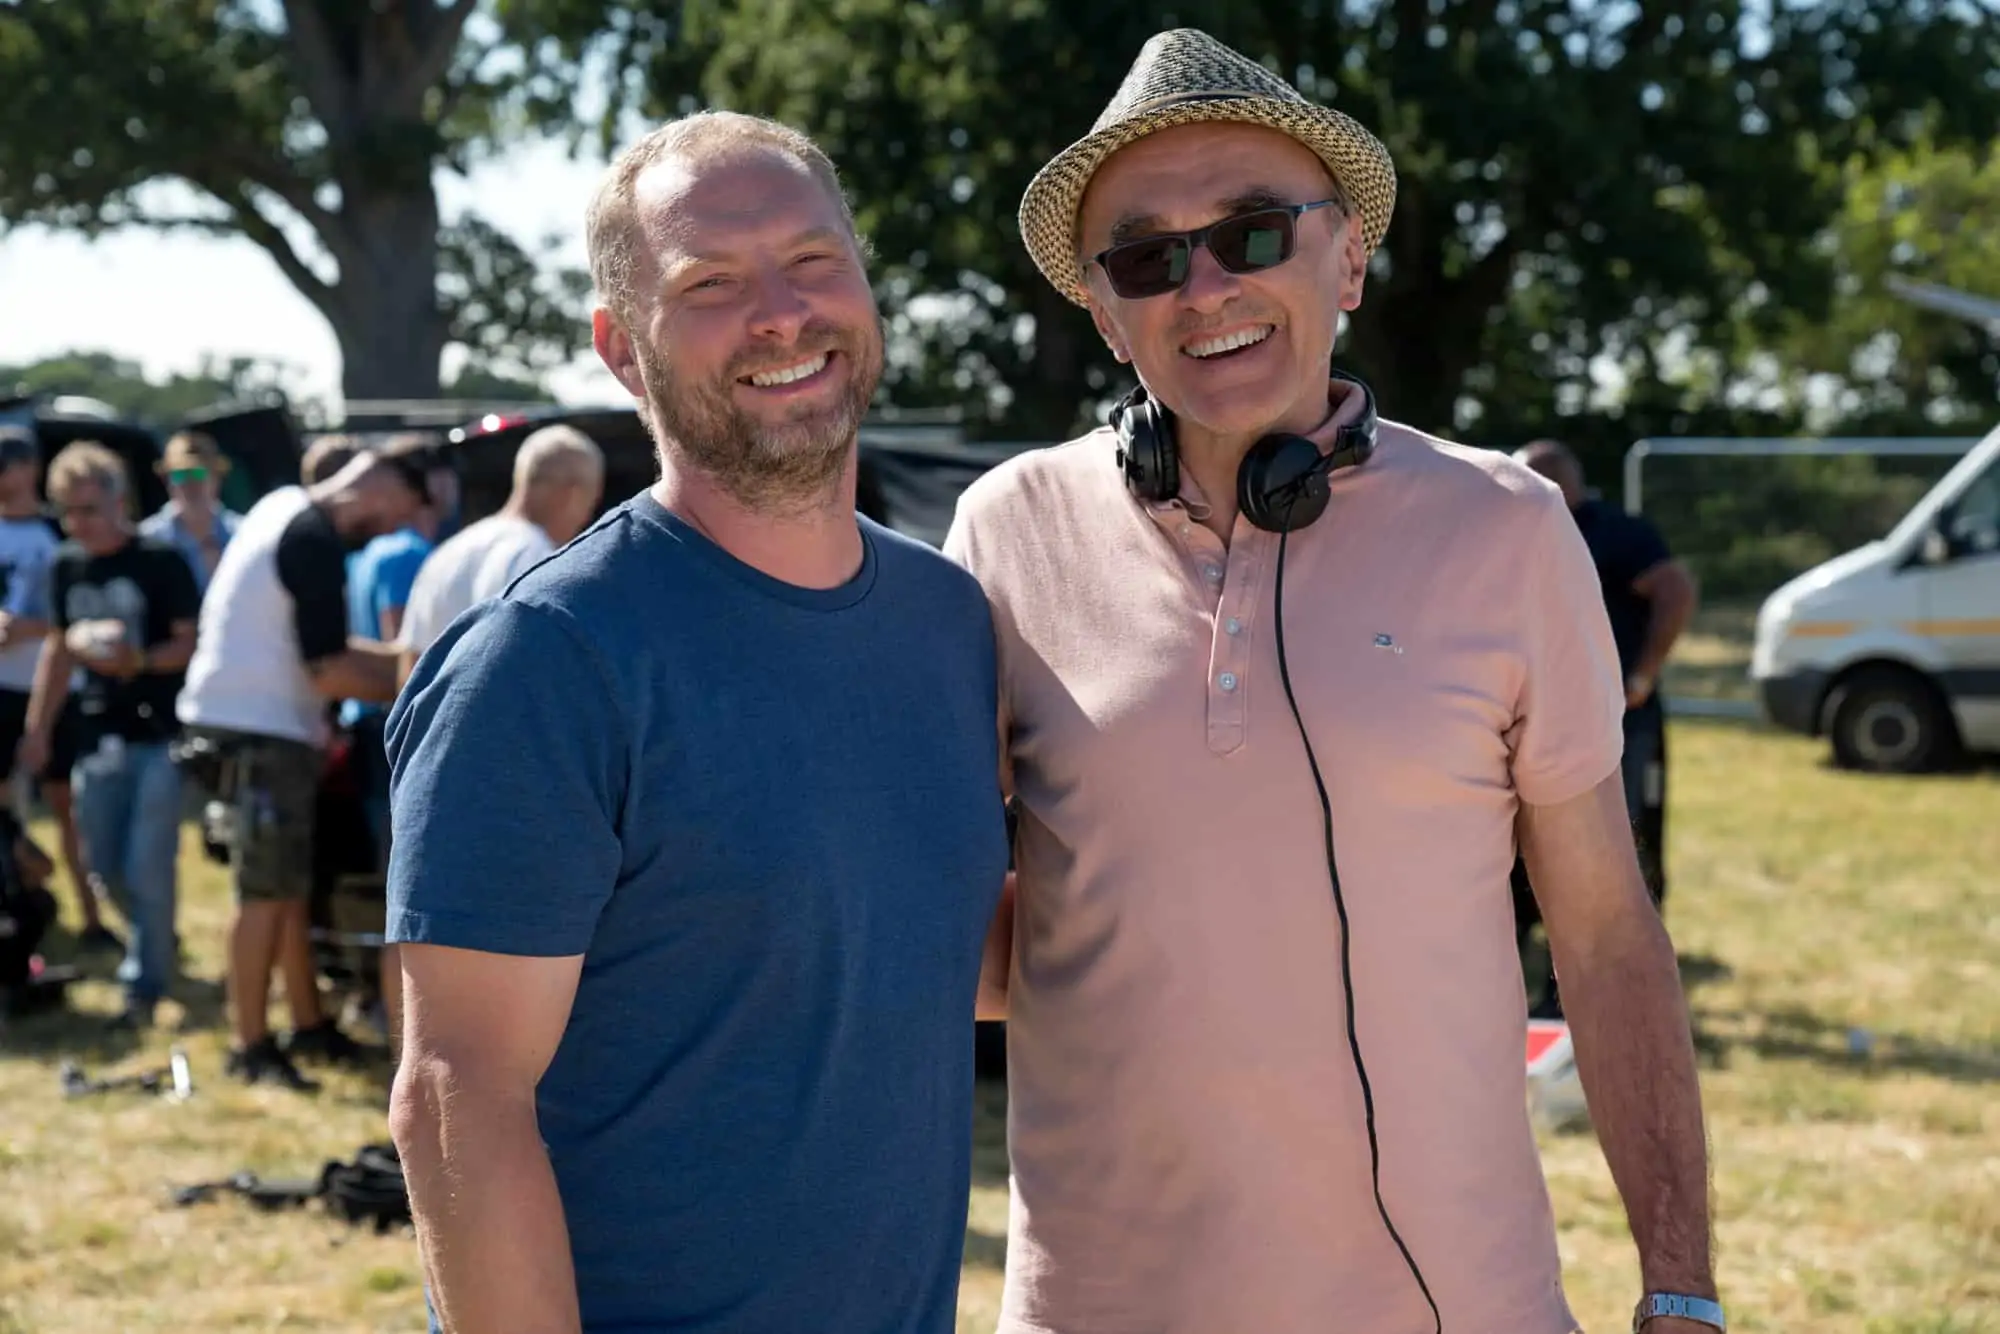 DP Christopher Ross BSC and Director Danny Boyle